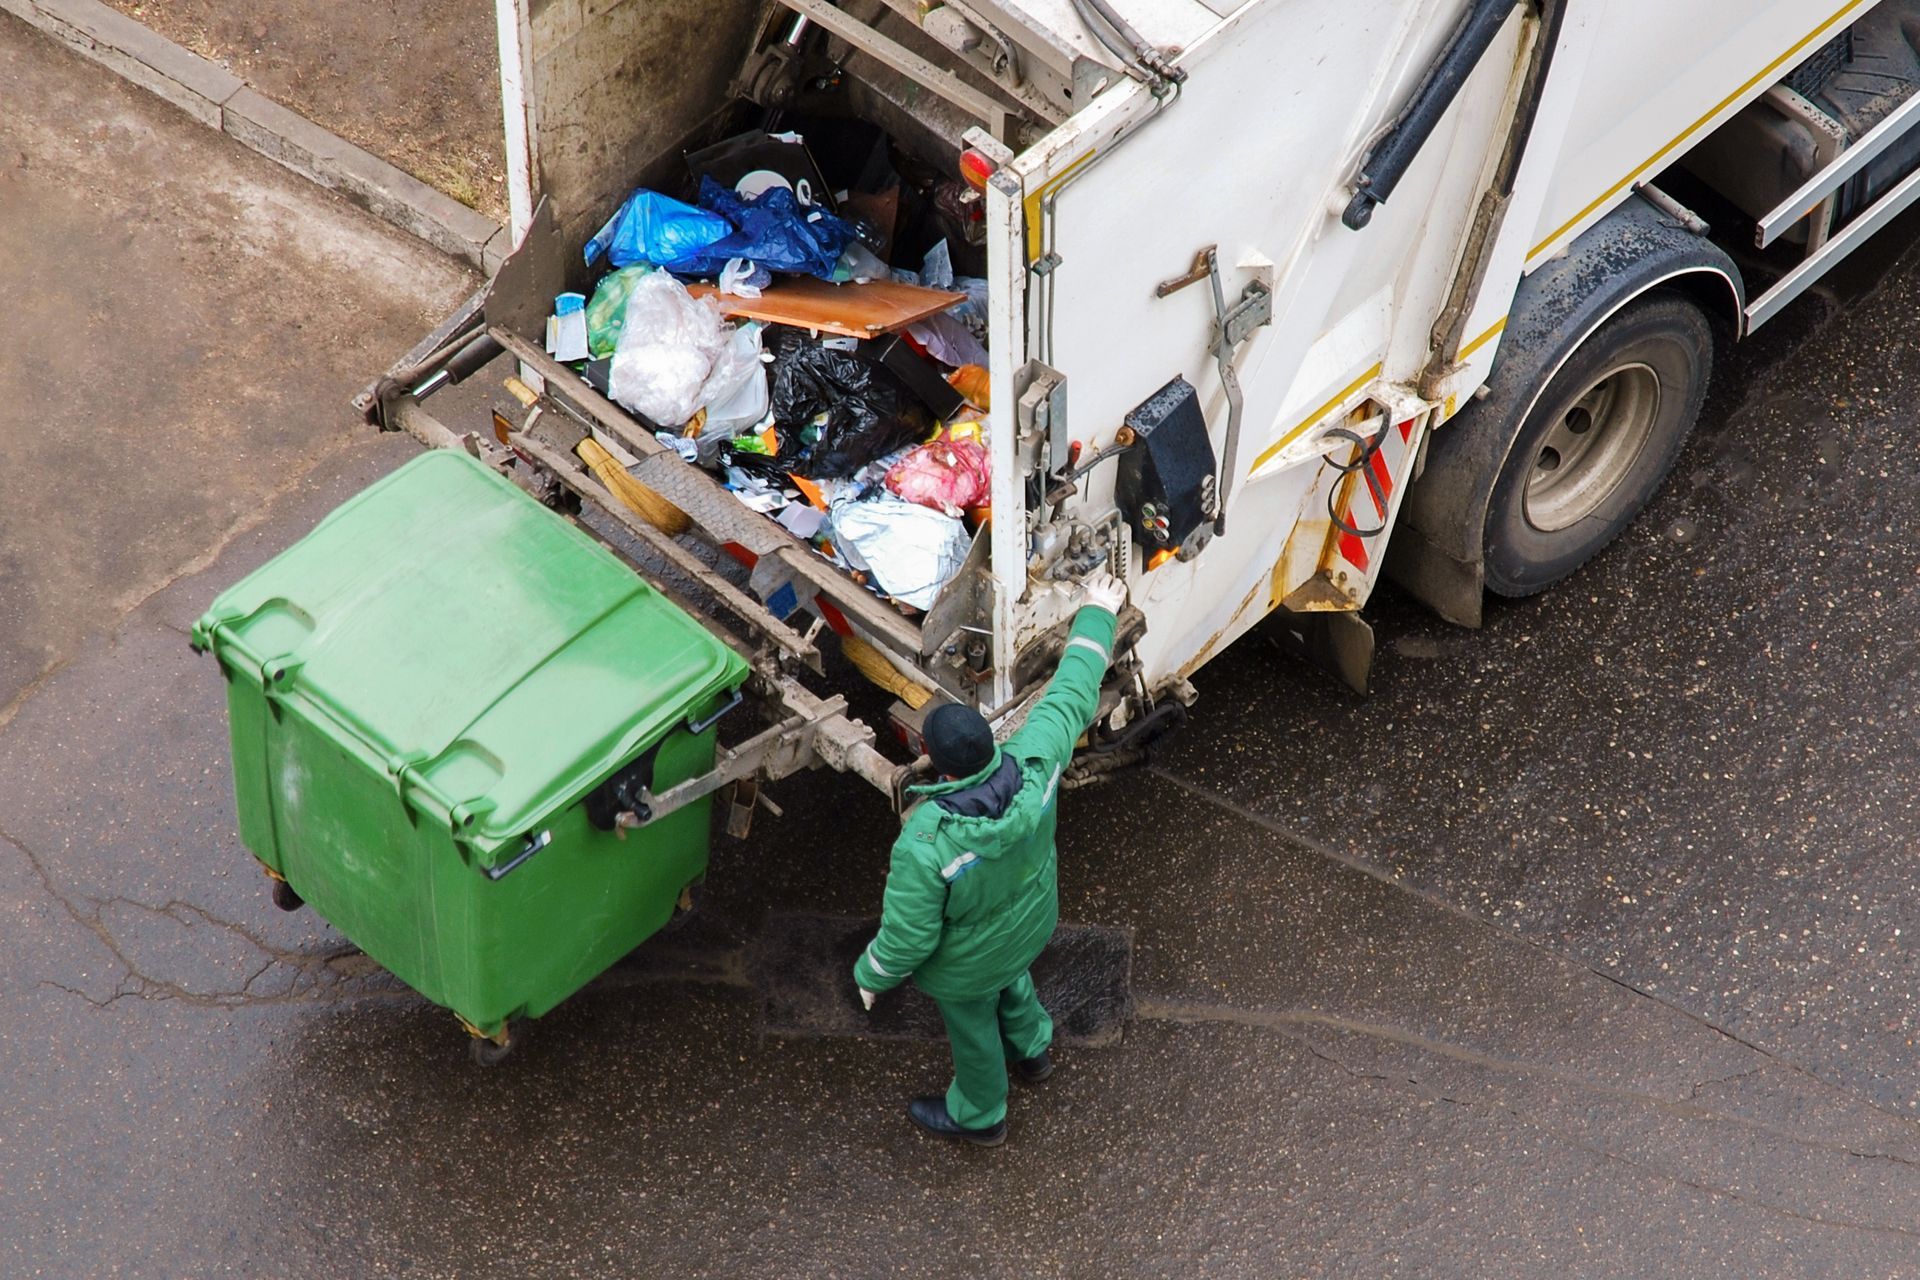 a man is loading garbage into a garbage truck .